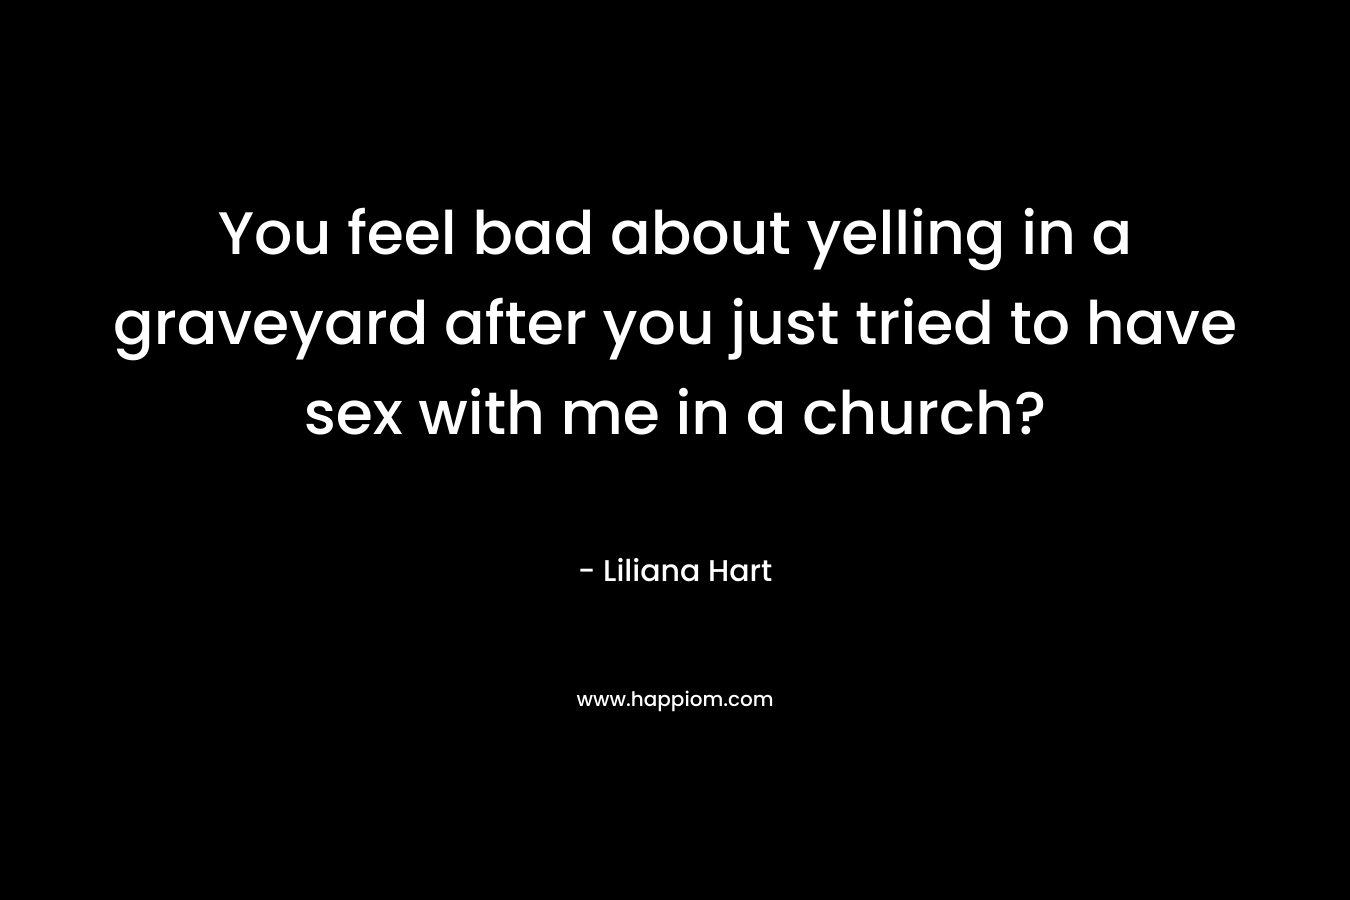 You feel bad about yelling in a graveyard after you just tried to have sex with me in a church? – Liliana Hart